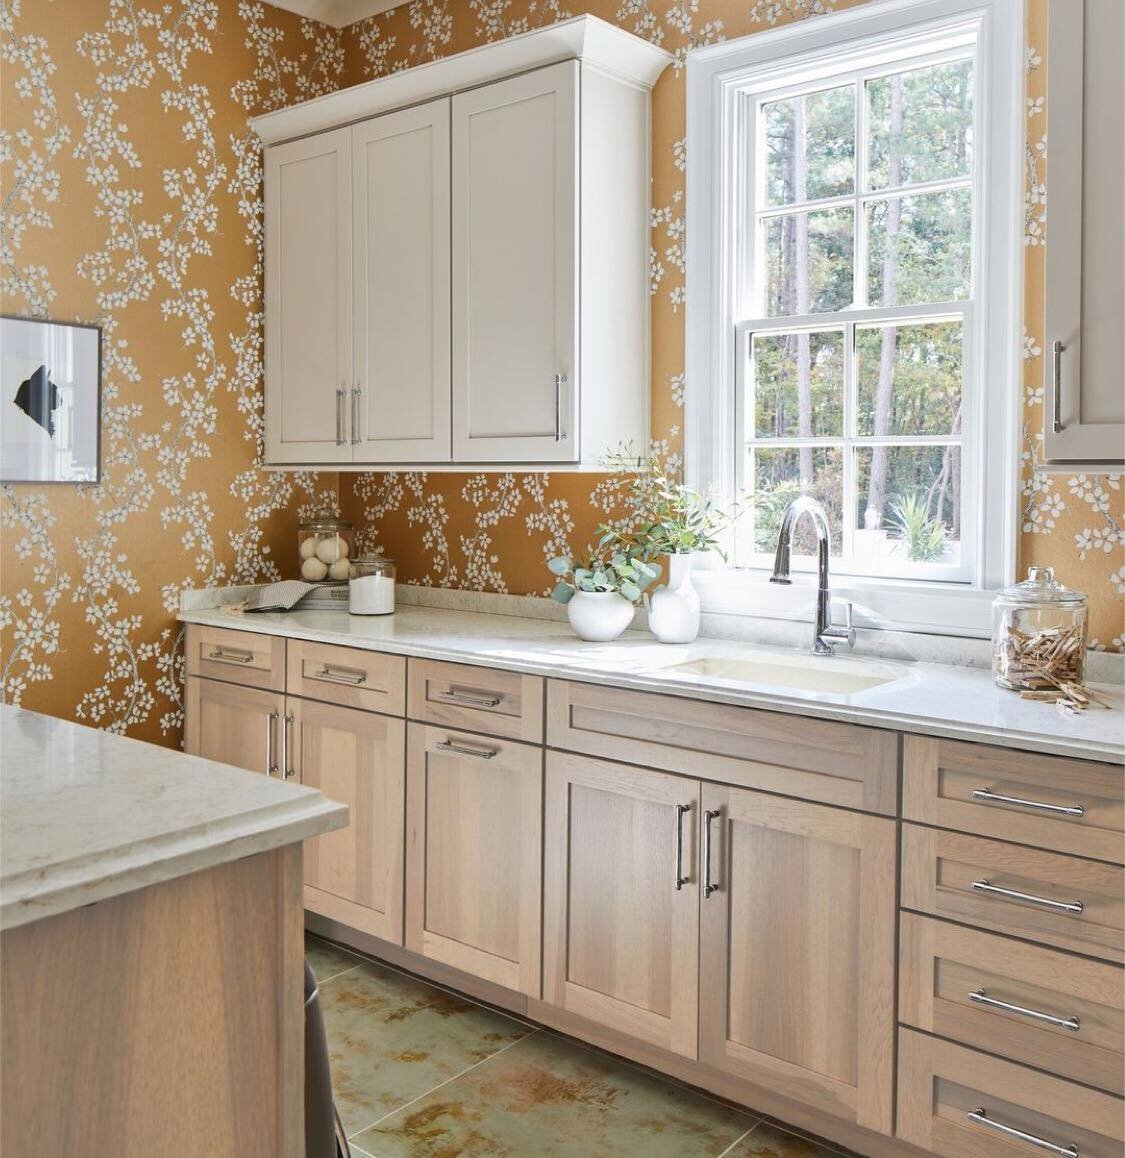 Whether it's the laundry room, mudroom, kitchen, or bath, we are ready to help design your new space! We carry multiple lines of cabinetry to help you find the perfect style and finish. Call us today to set up an appointment at our Dillon showroom! 
